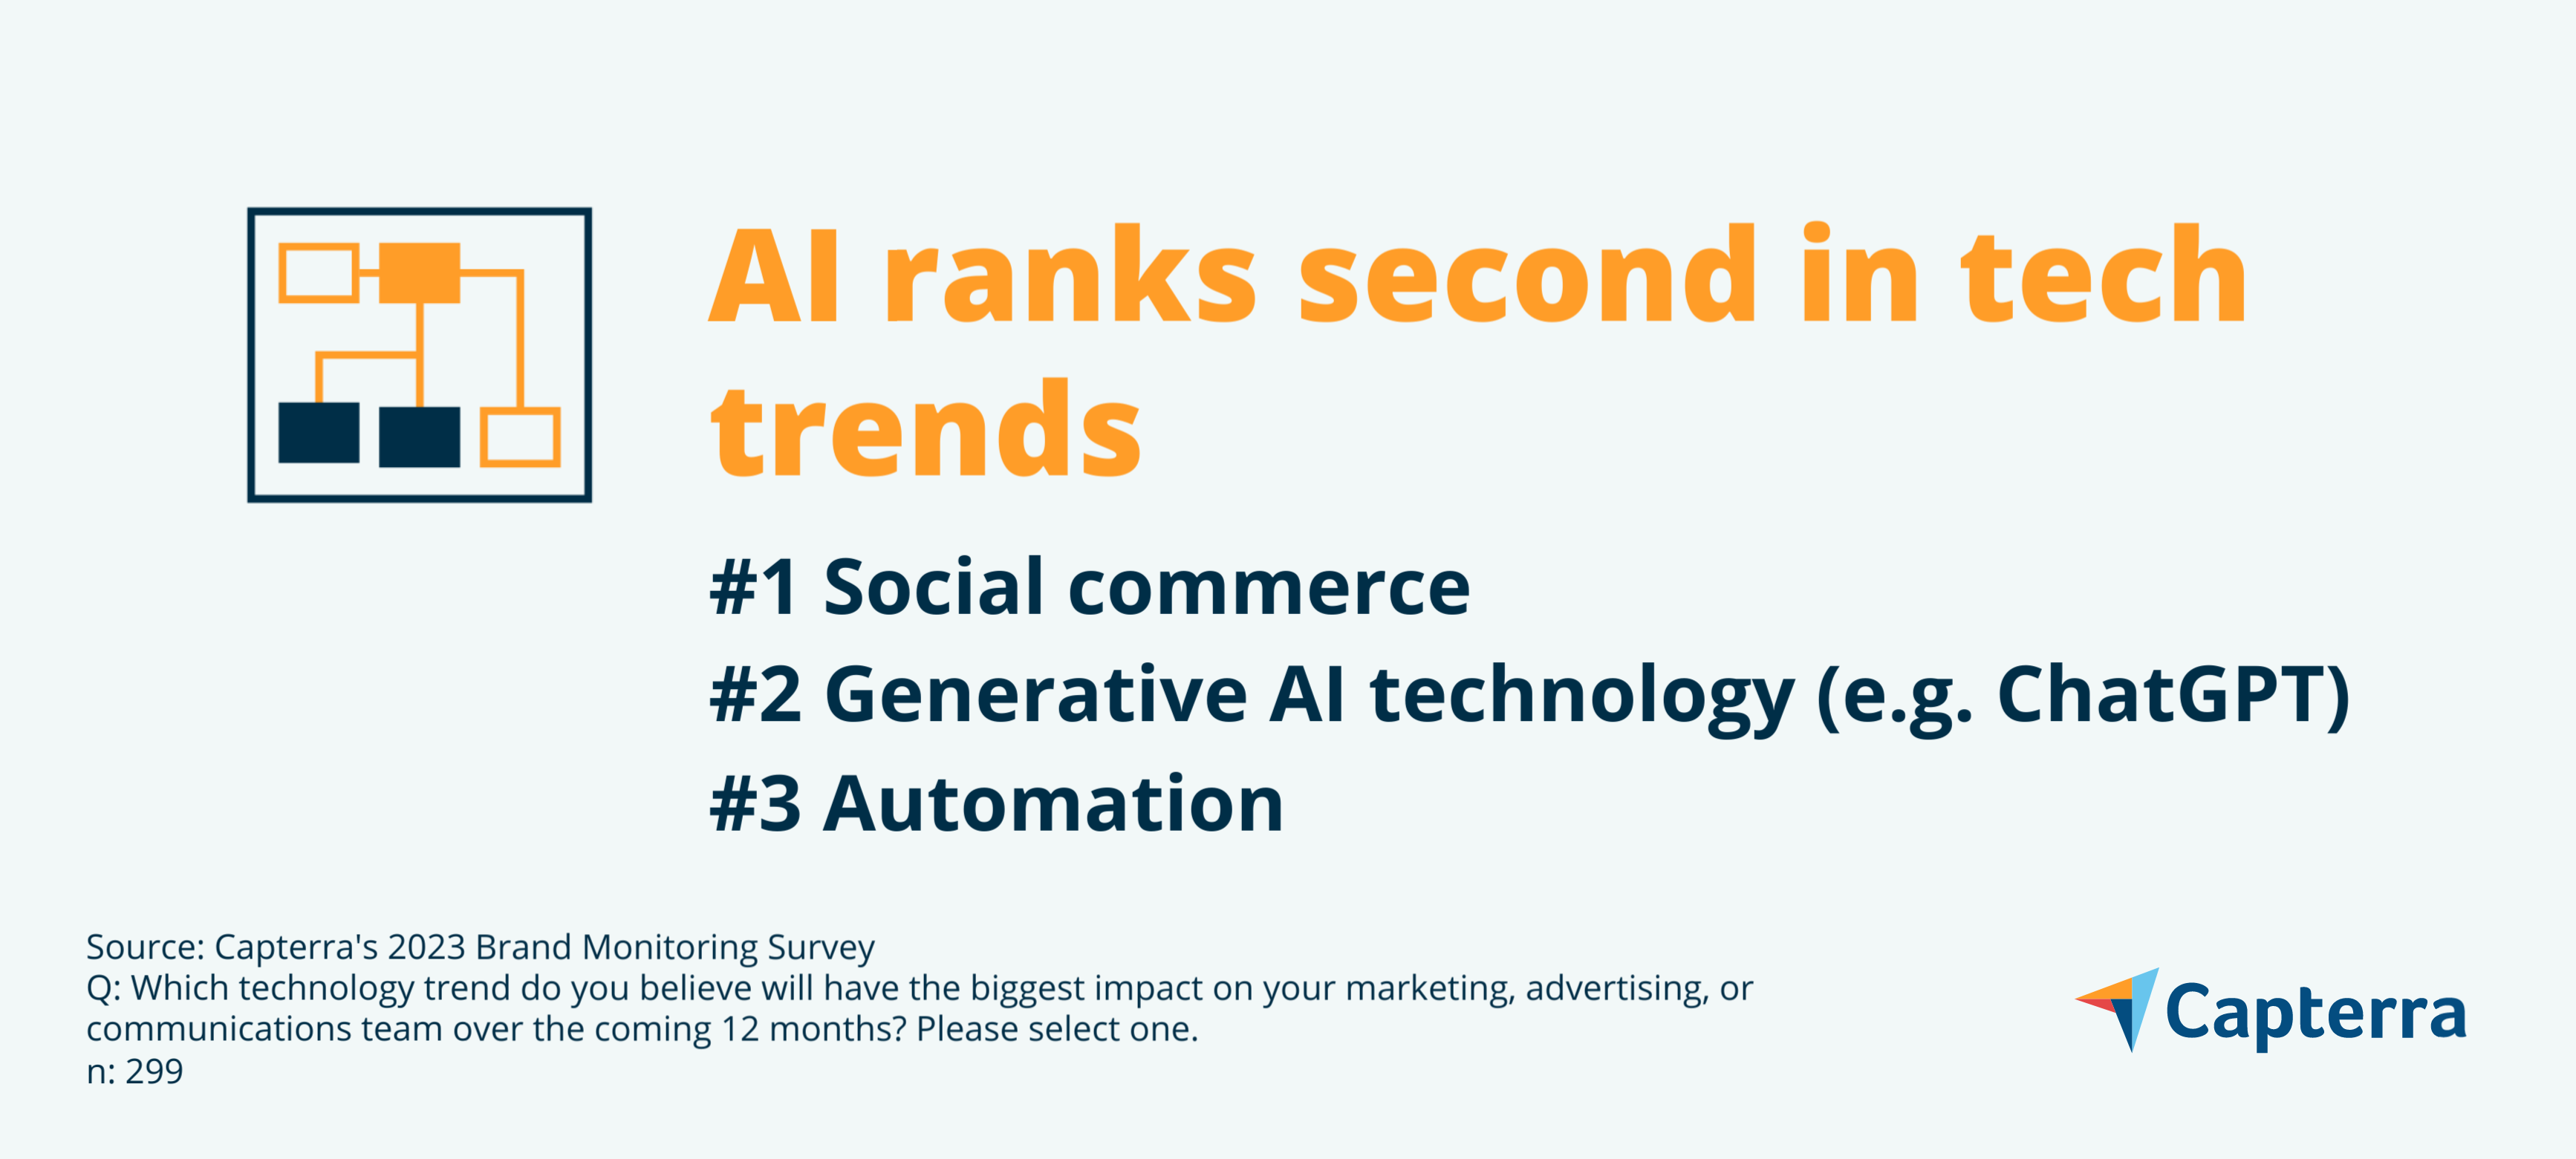 AI ranks second in tech trends graphic for the blog article "Why Marketers Need a Brand Monitoring Strategy in the Age of AI"